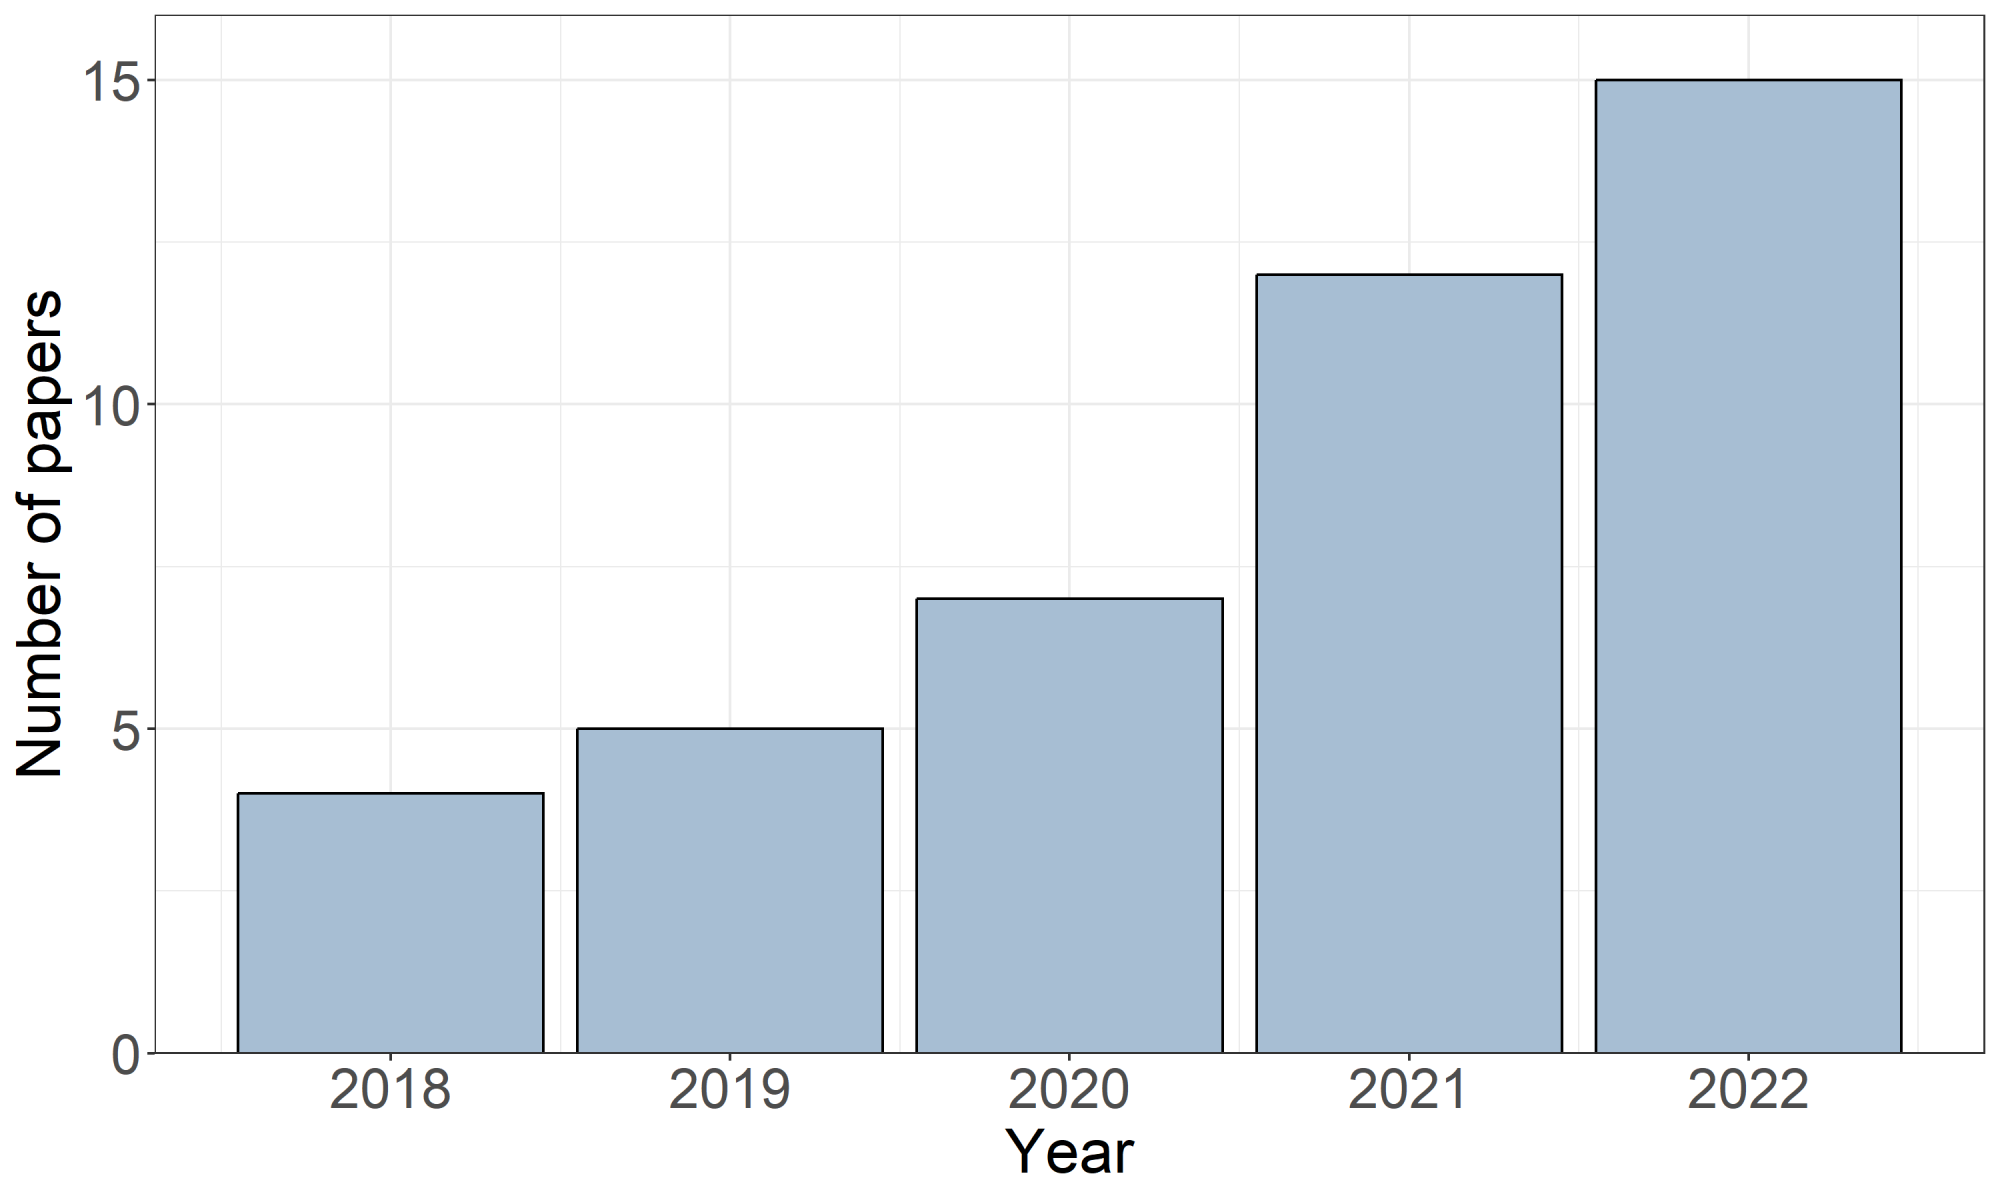 Bar chart showing that four papers were published in the year 2018, five in 2019, seven in 2020, 12 in 2021 and 15 in 2022.